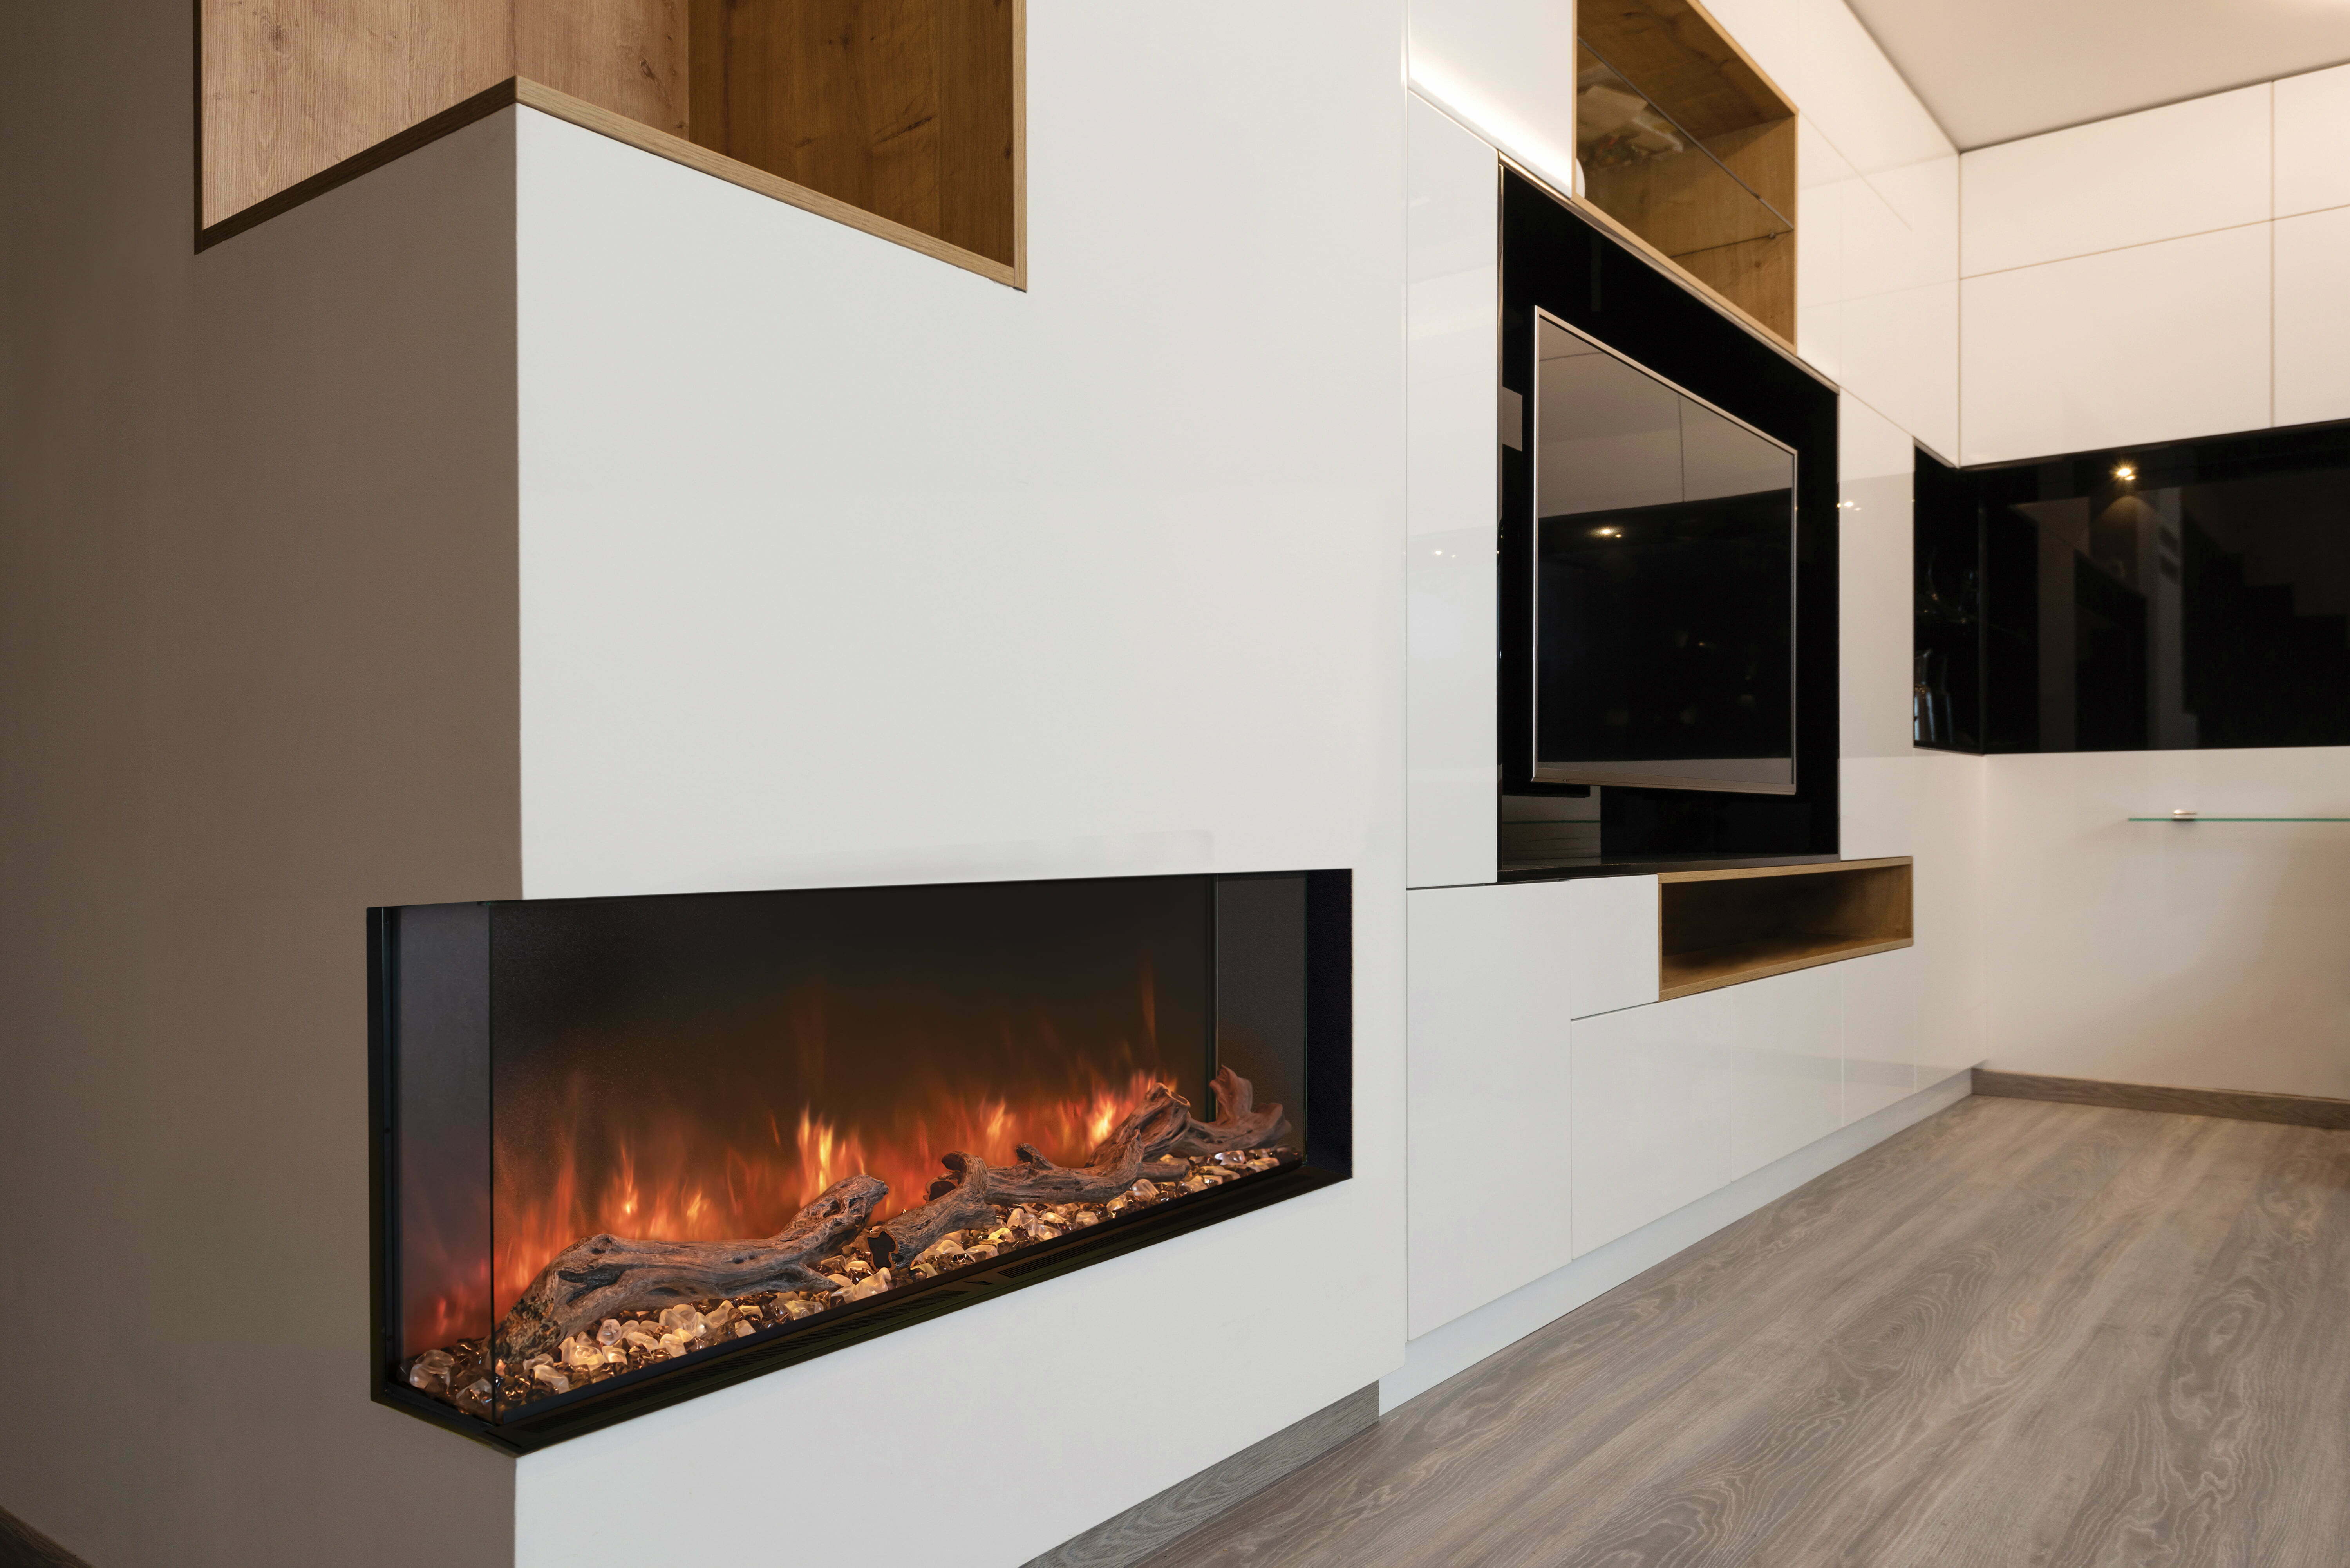 68 Inch Electric Fireplace Lpm 6816, Electric Wall Mounted Fireplace Australia